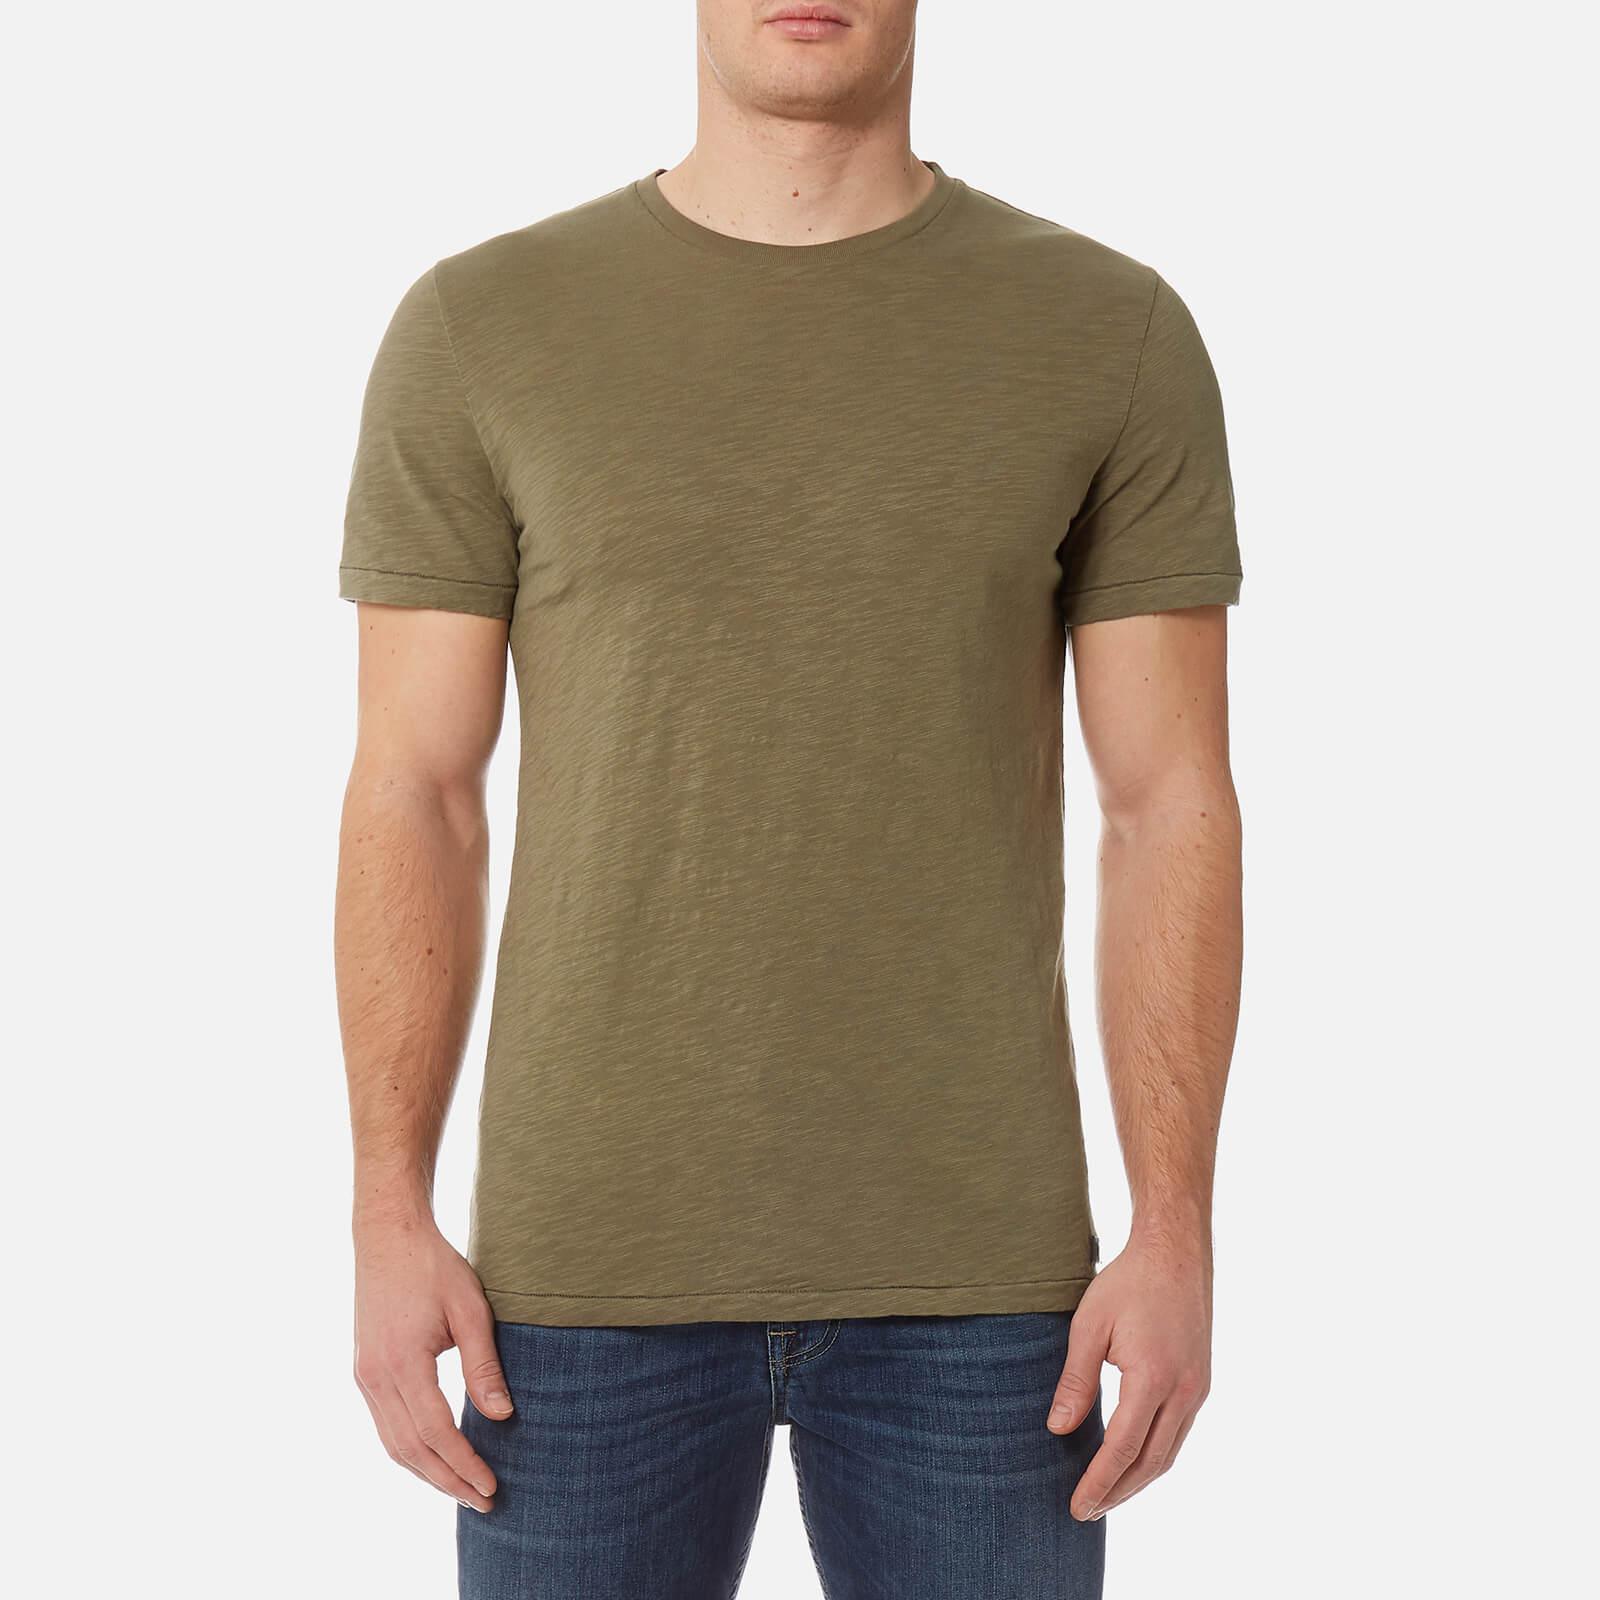 7 For All Mankind Cotton Basic T-shirt in Green for Men - Lyst